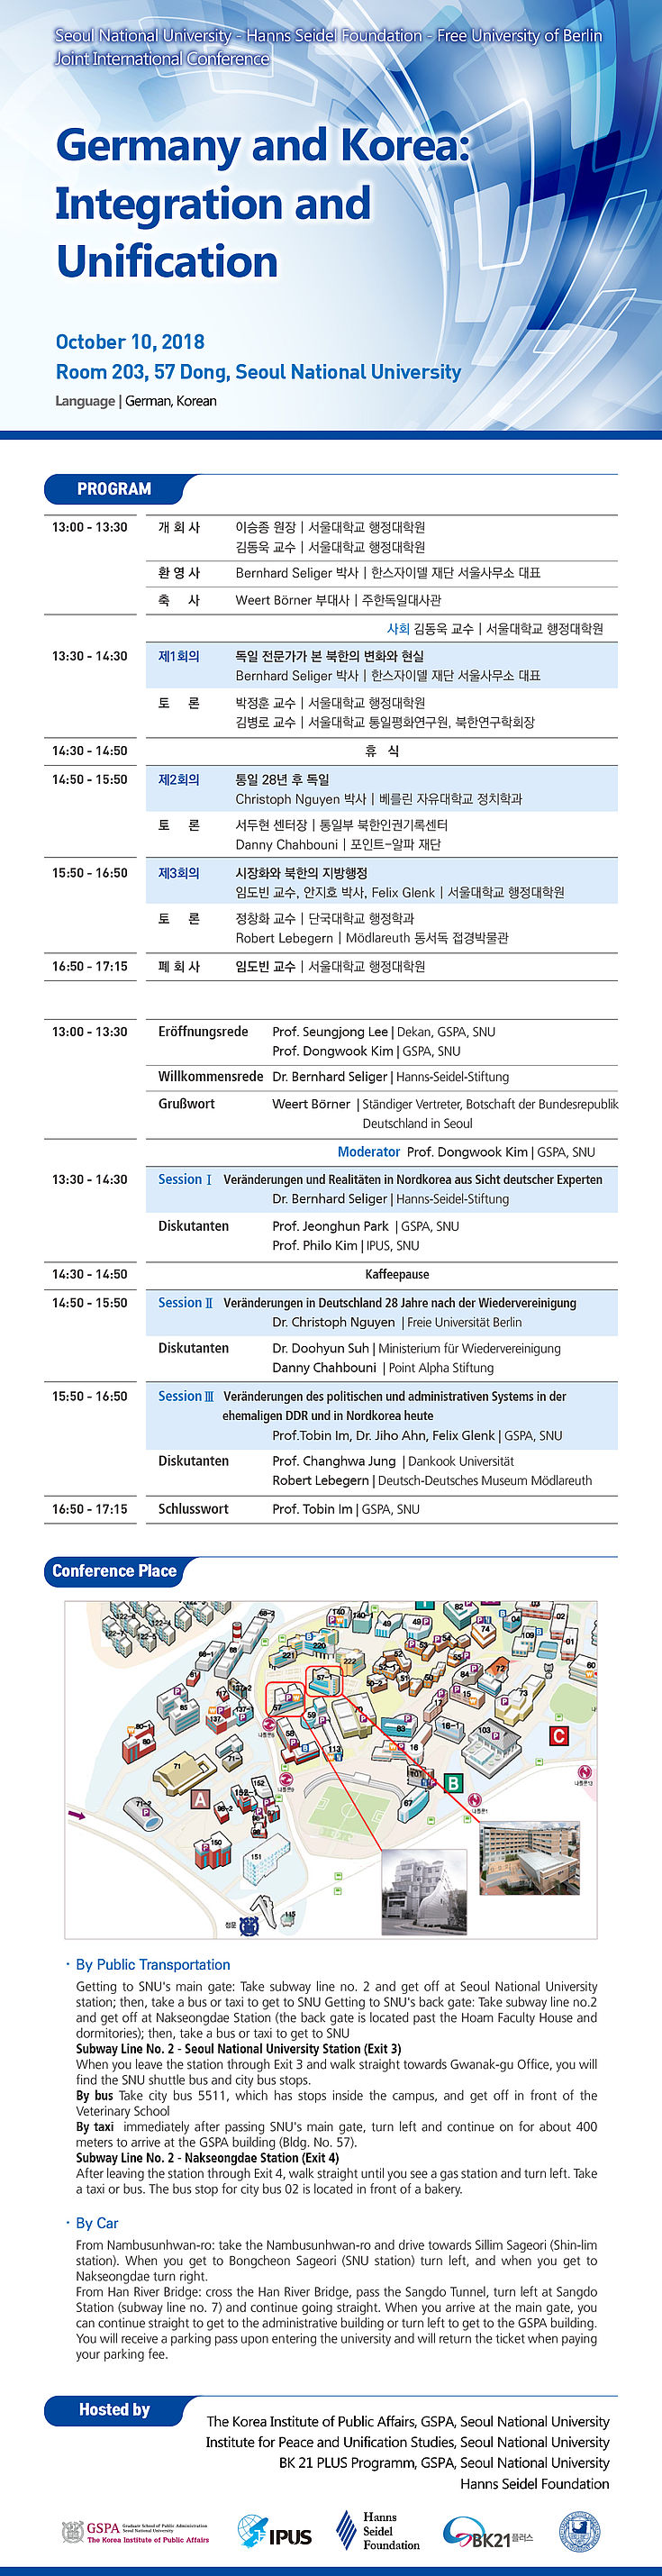 Program for the conference "Germany and Korea: Integration and Unification"